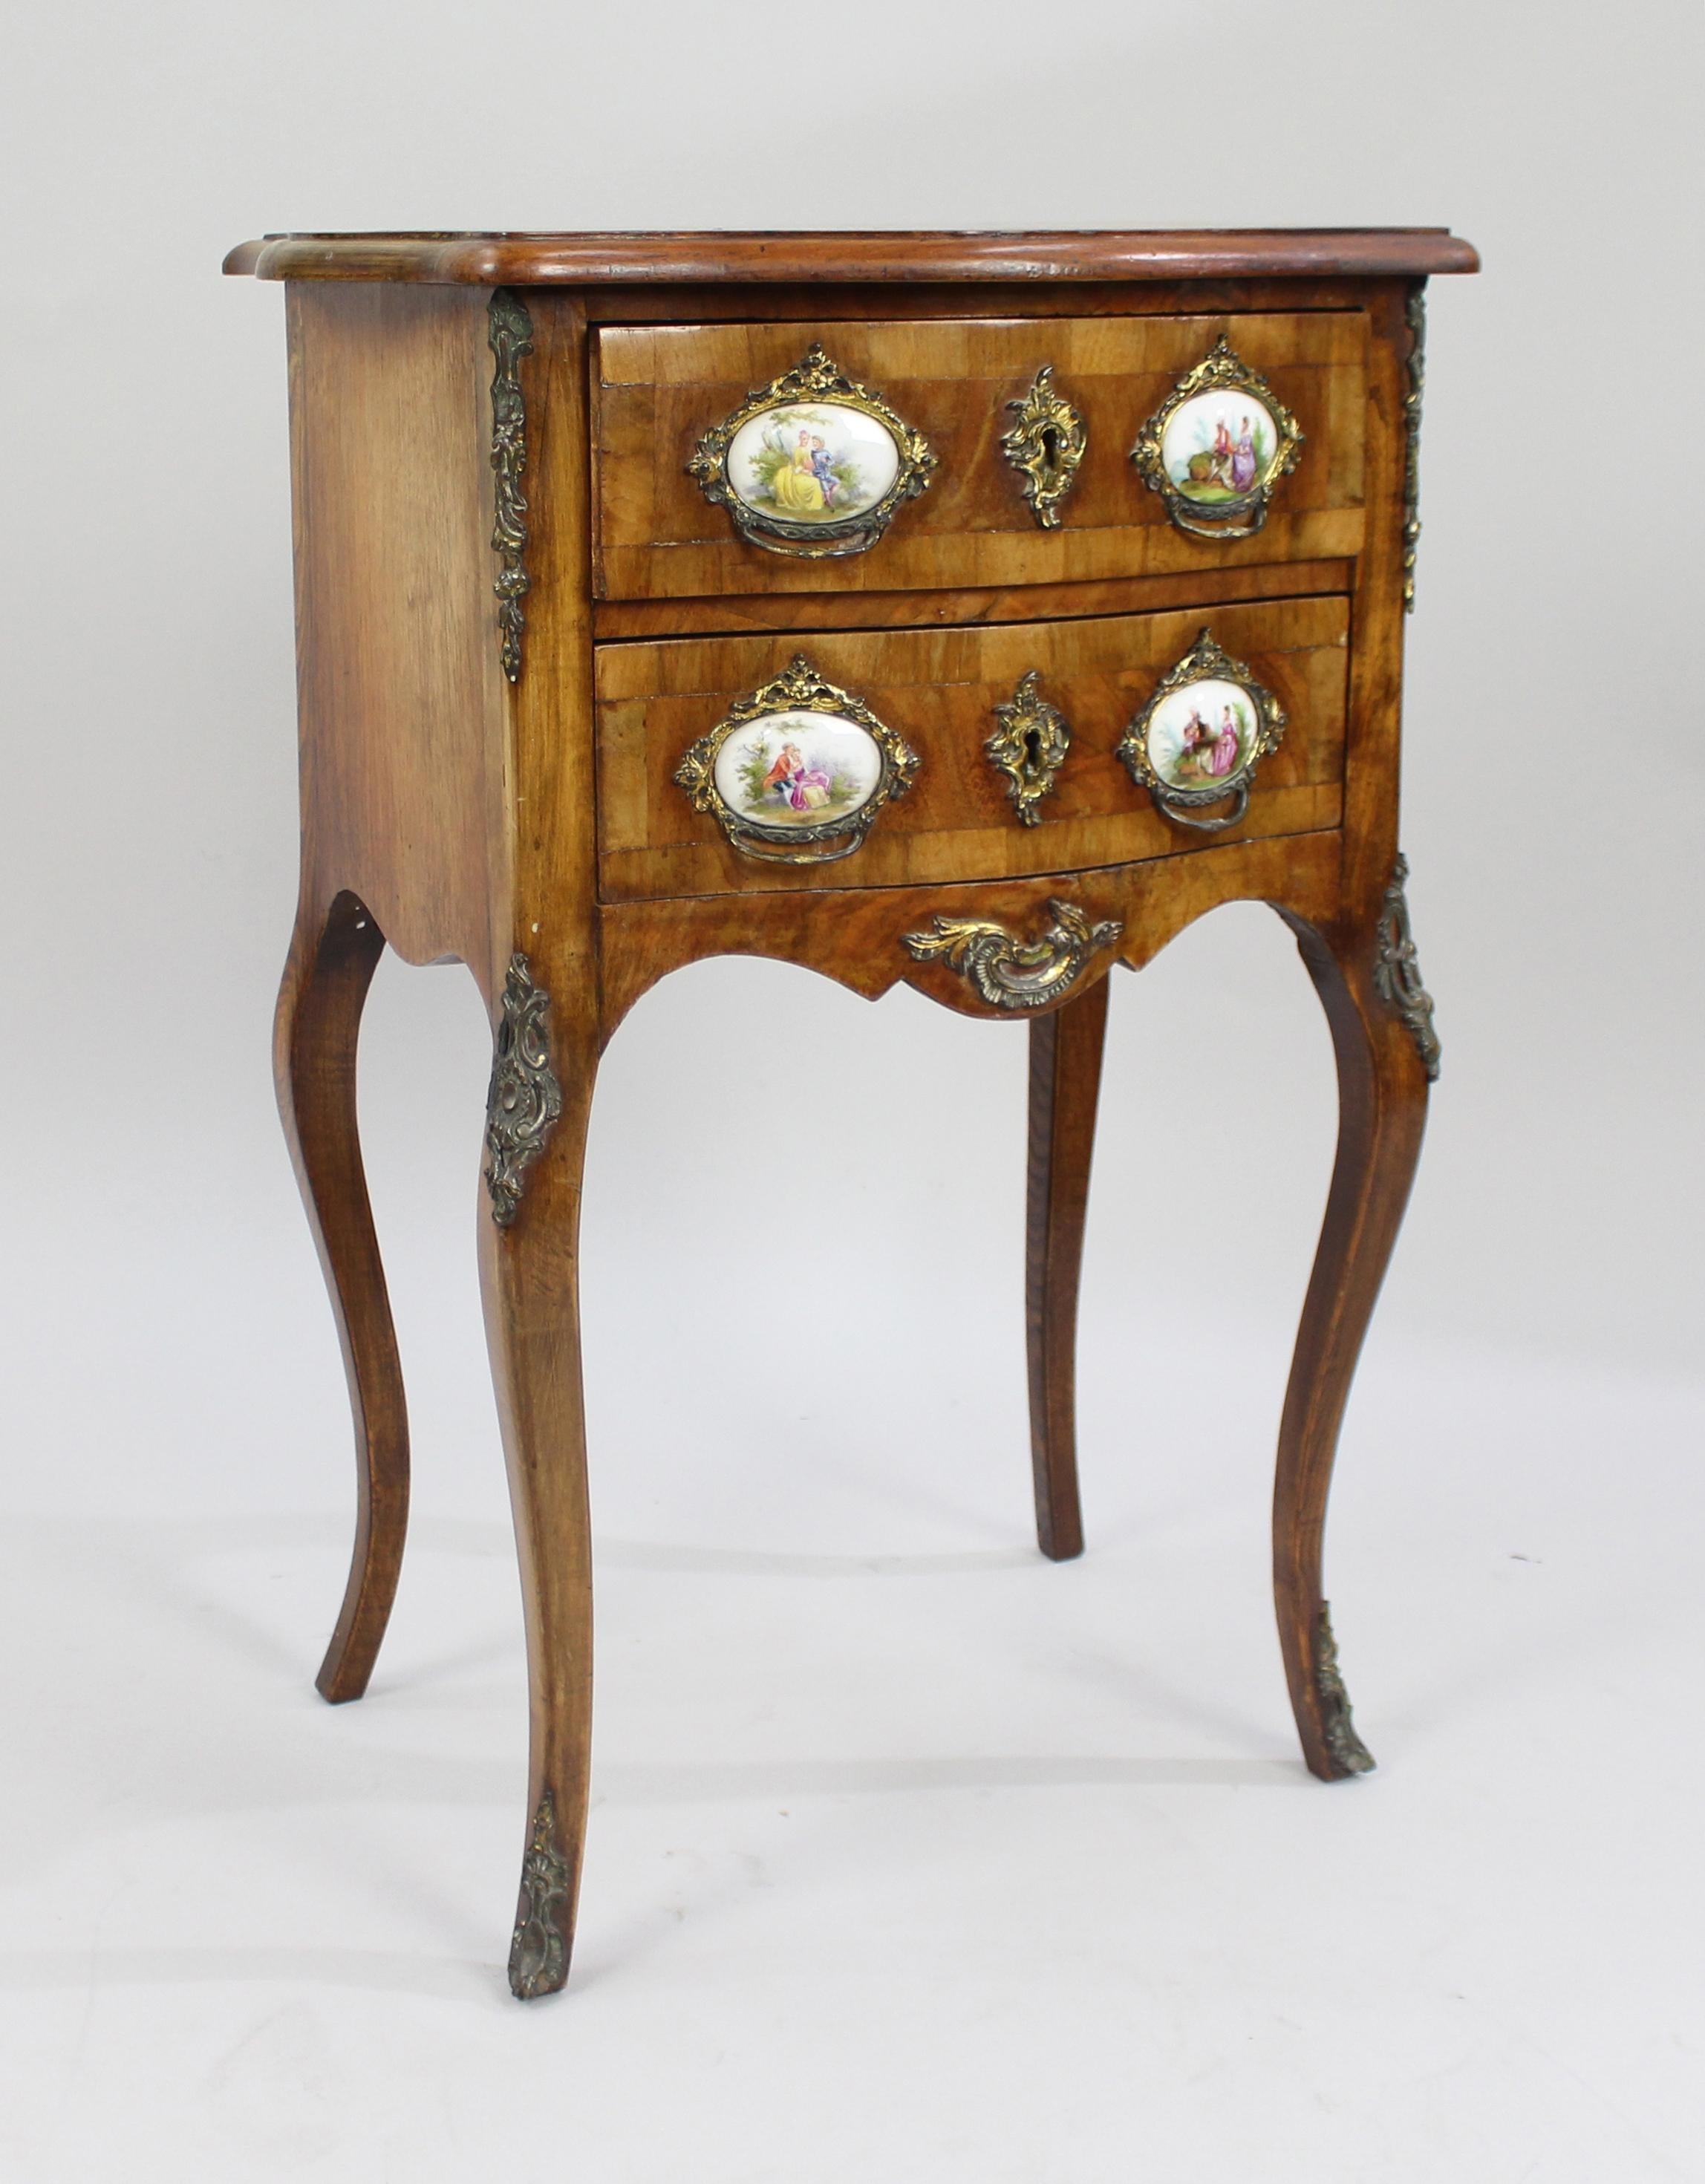 Period
Louis XV style, French, circa 1880

Wood 
Walnut

Condition:
Offered in sound structural condition. Some wear and fading to the top. A few marks to wood commensurate with age. No key present
 
Elegant small French two drawer